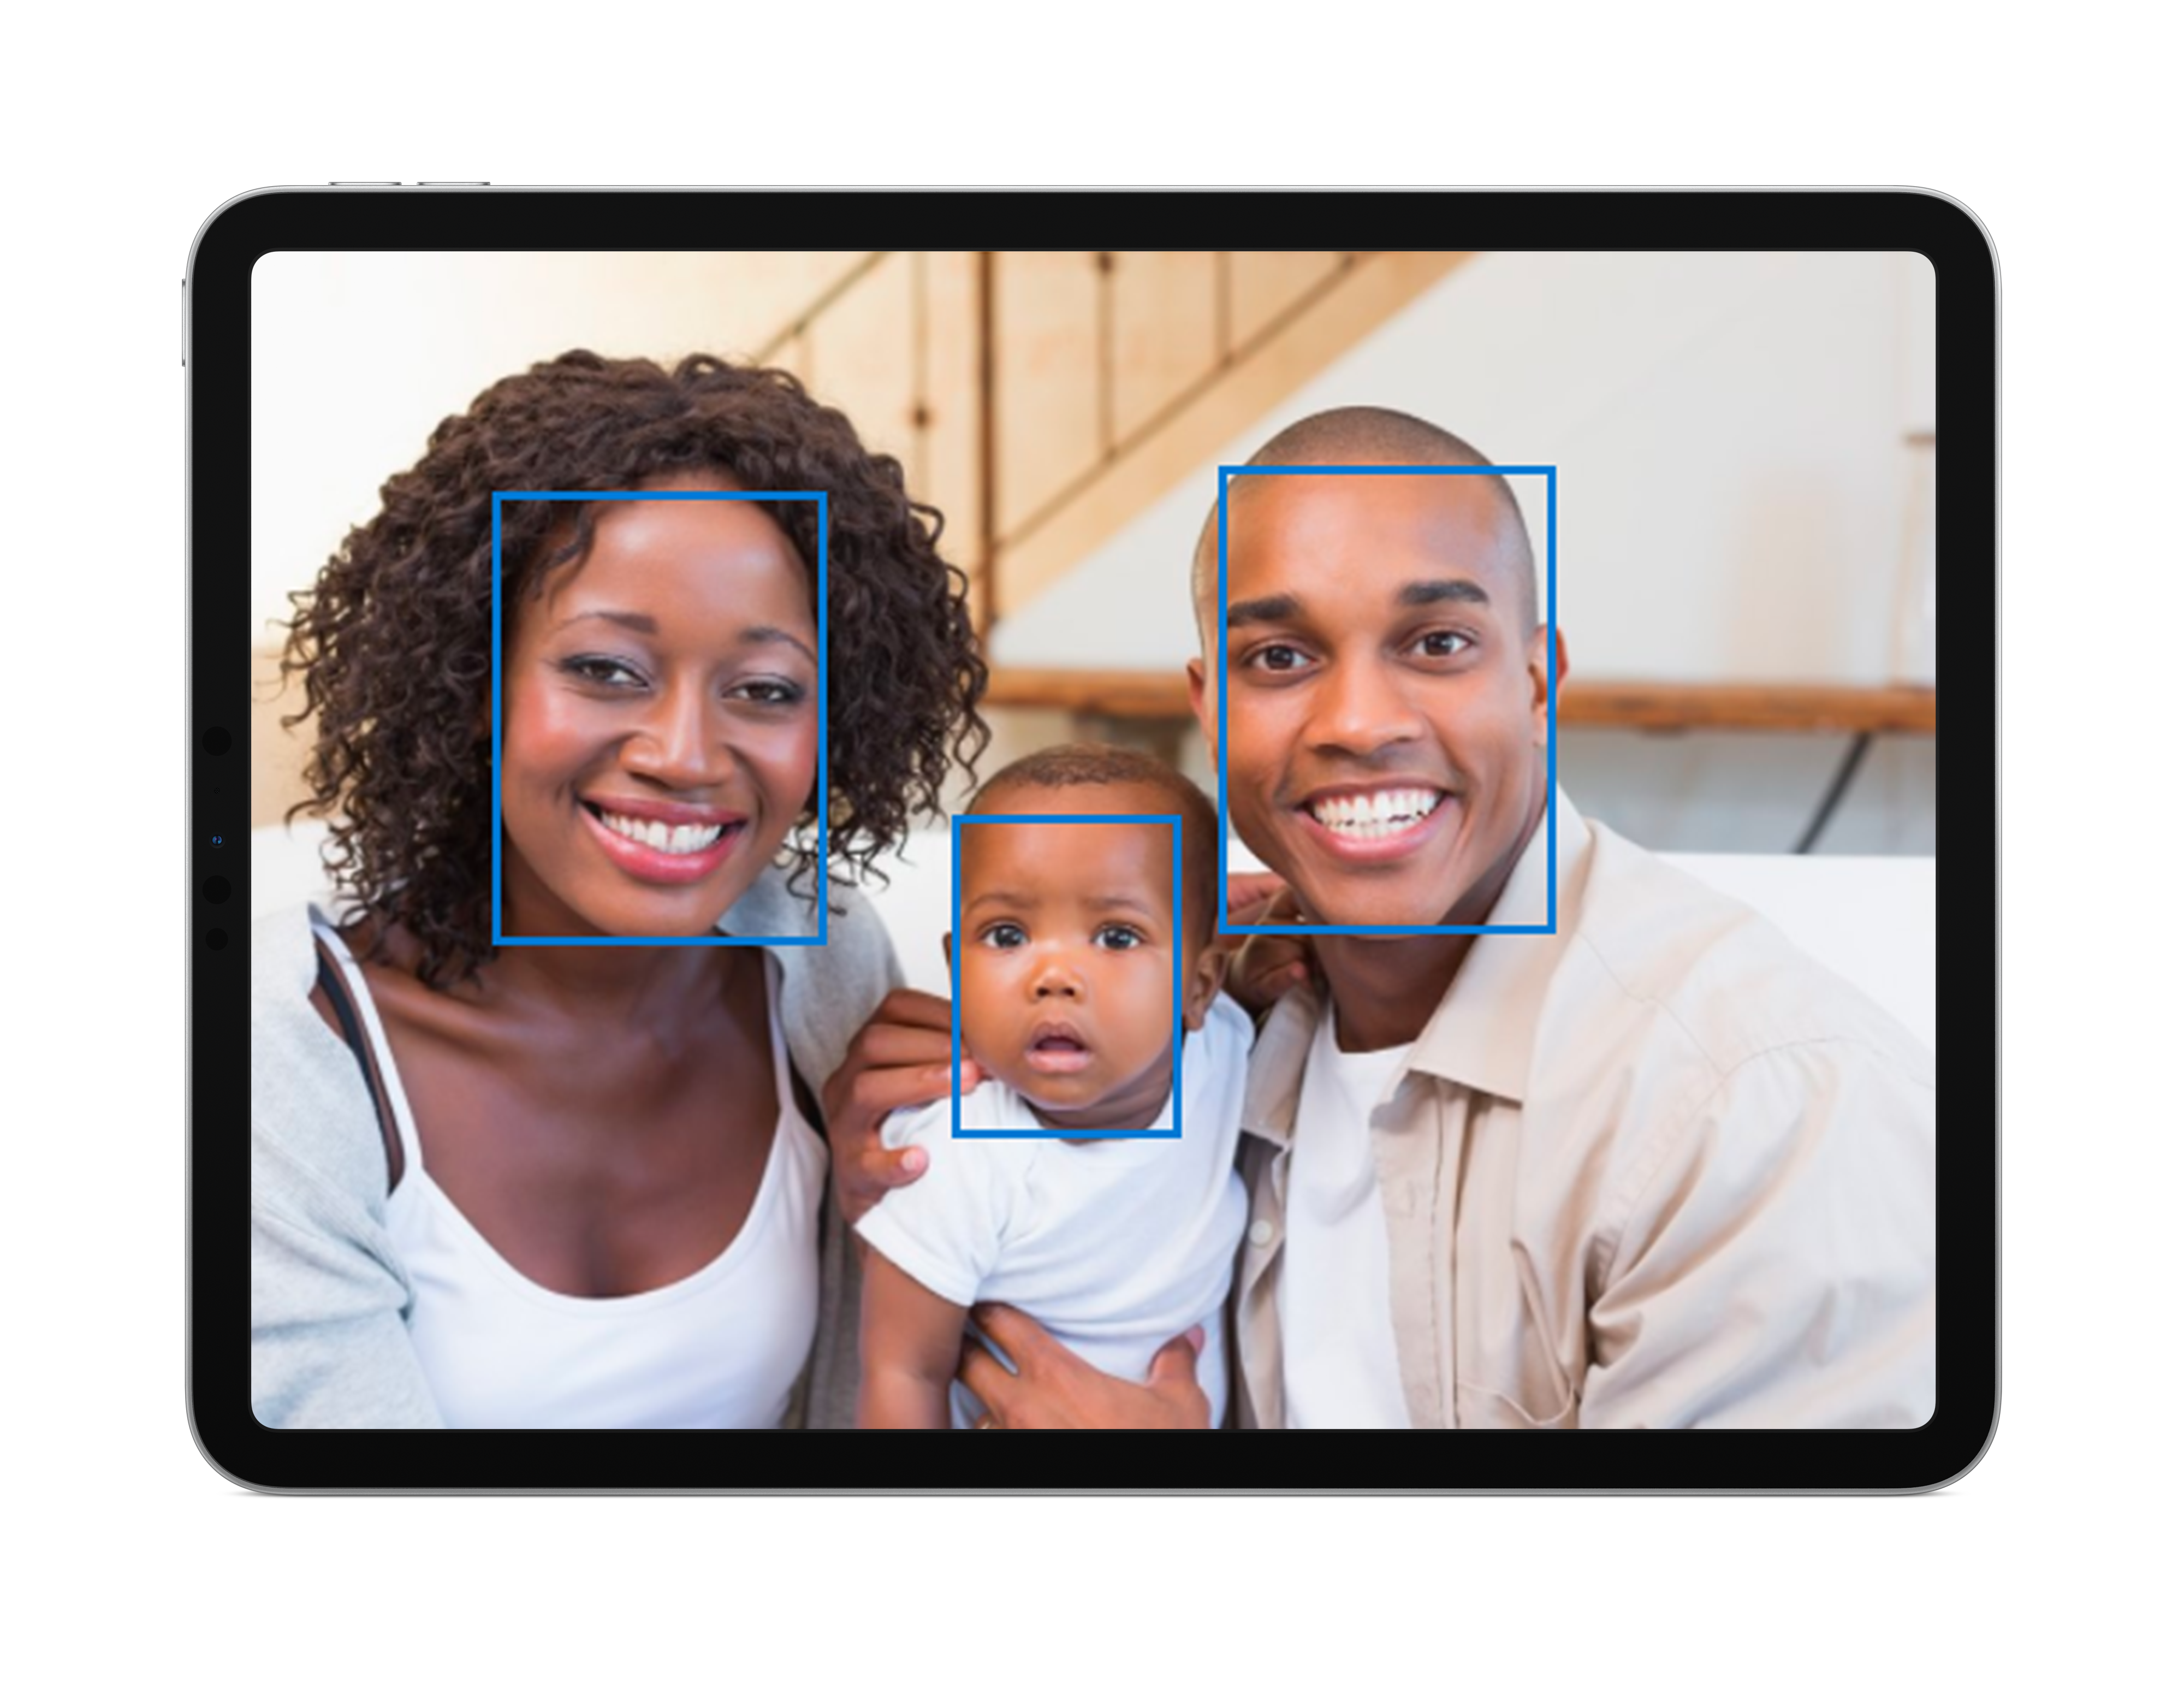 AI technology with face detection